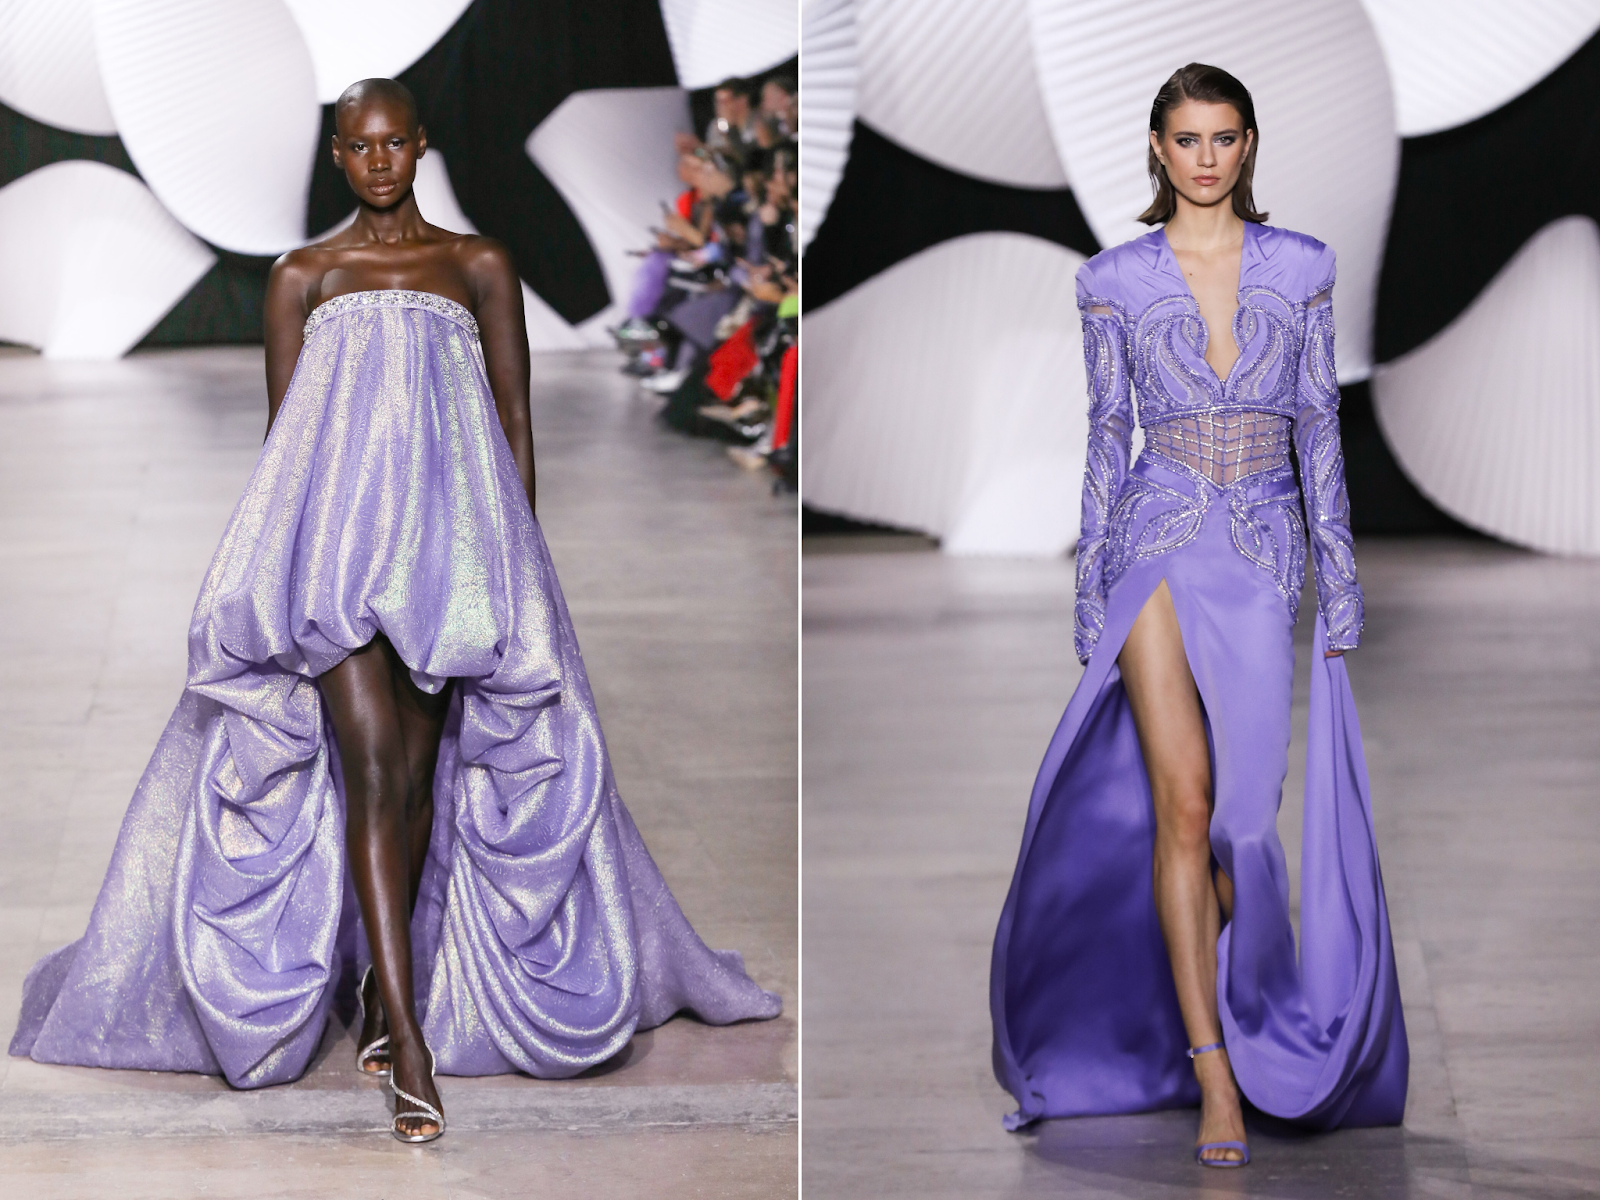 Lebanese-Italian Designer Tony Ward Showcases 'The Golden Ratio' Collection at SS24 Paris Haute Couture Fashion Week